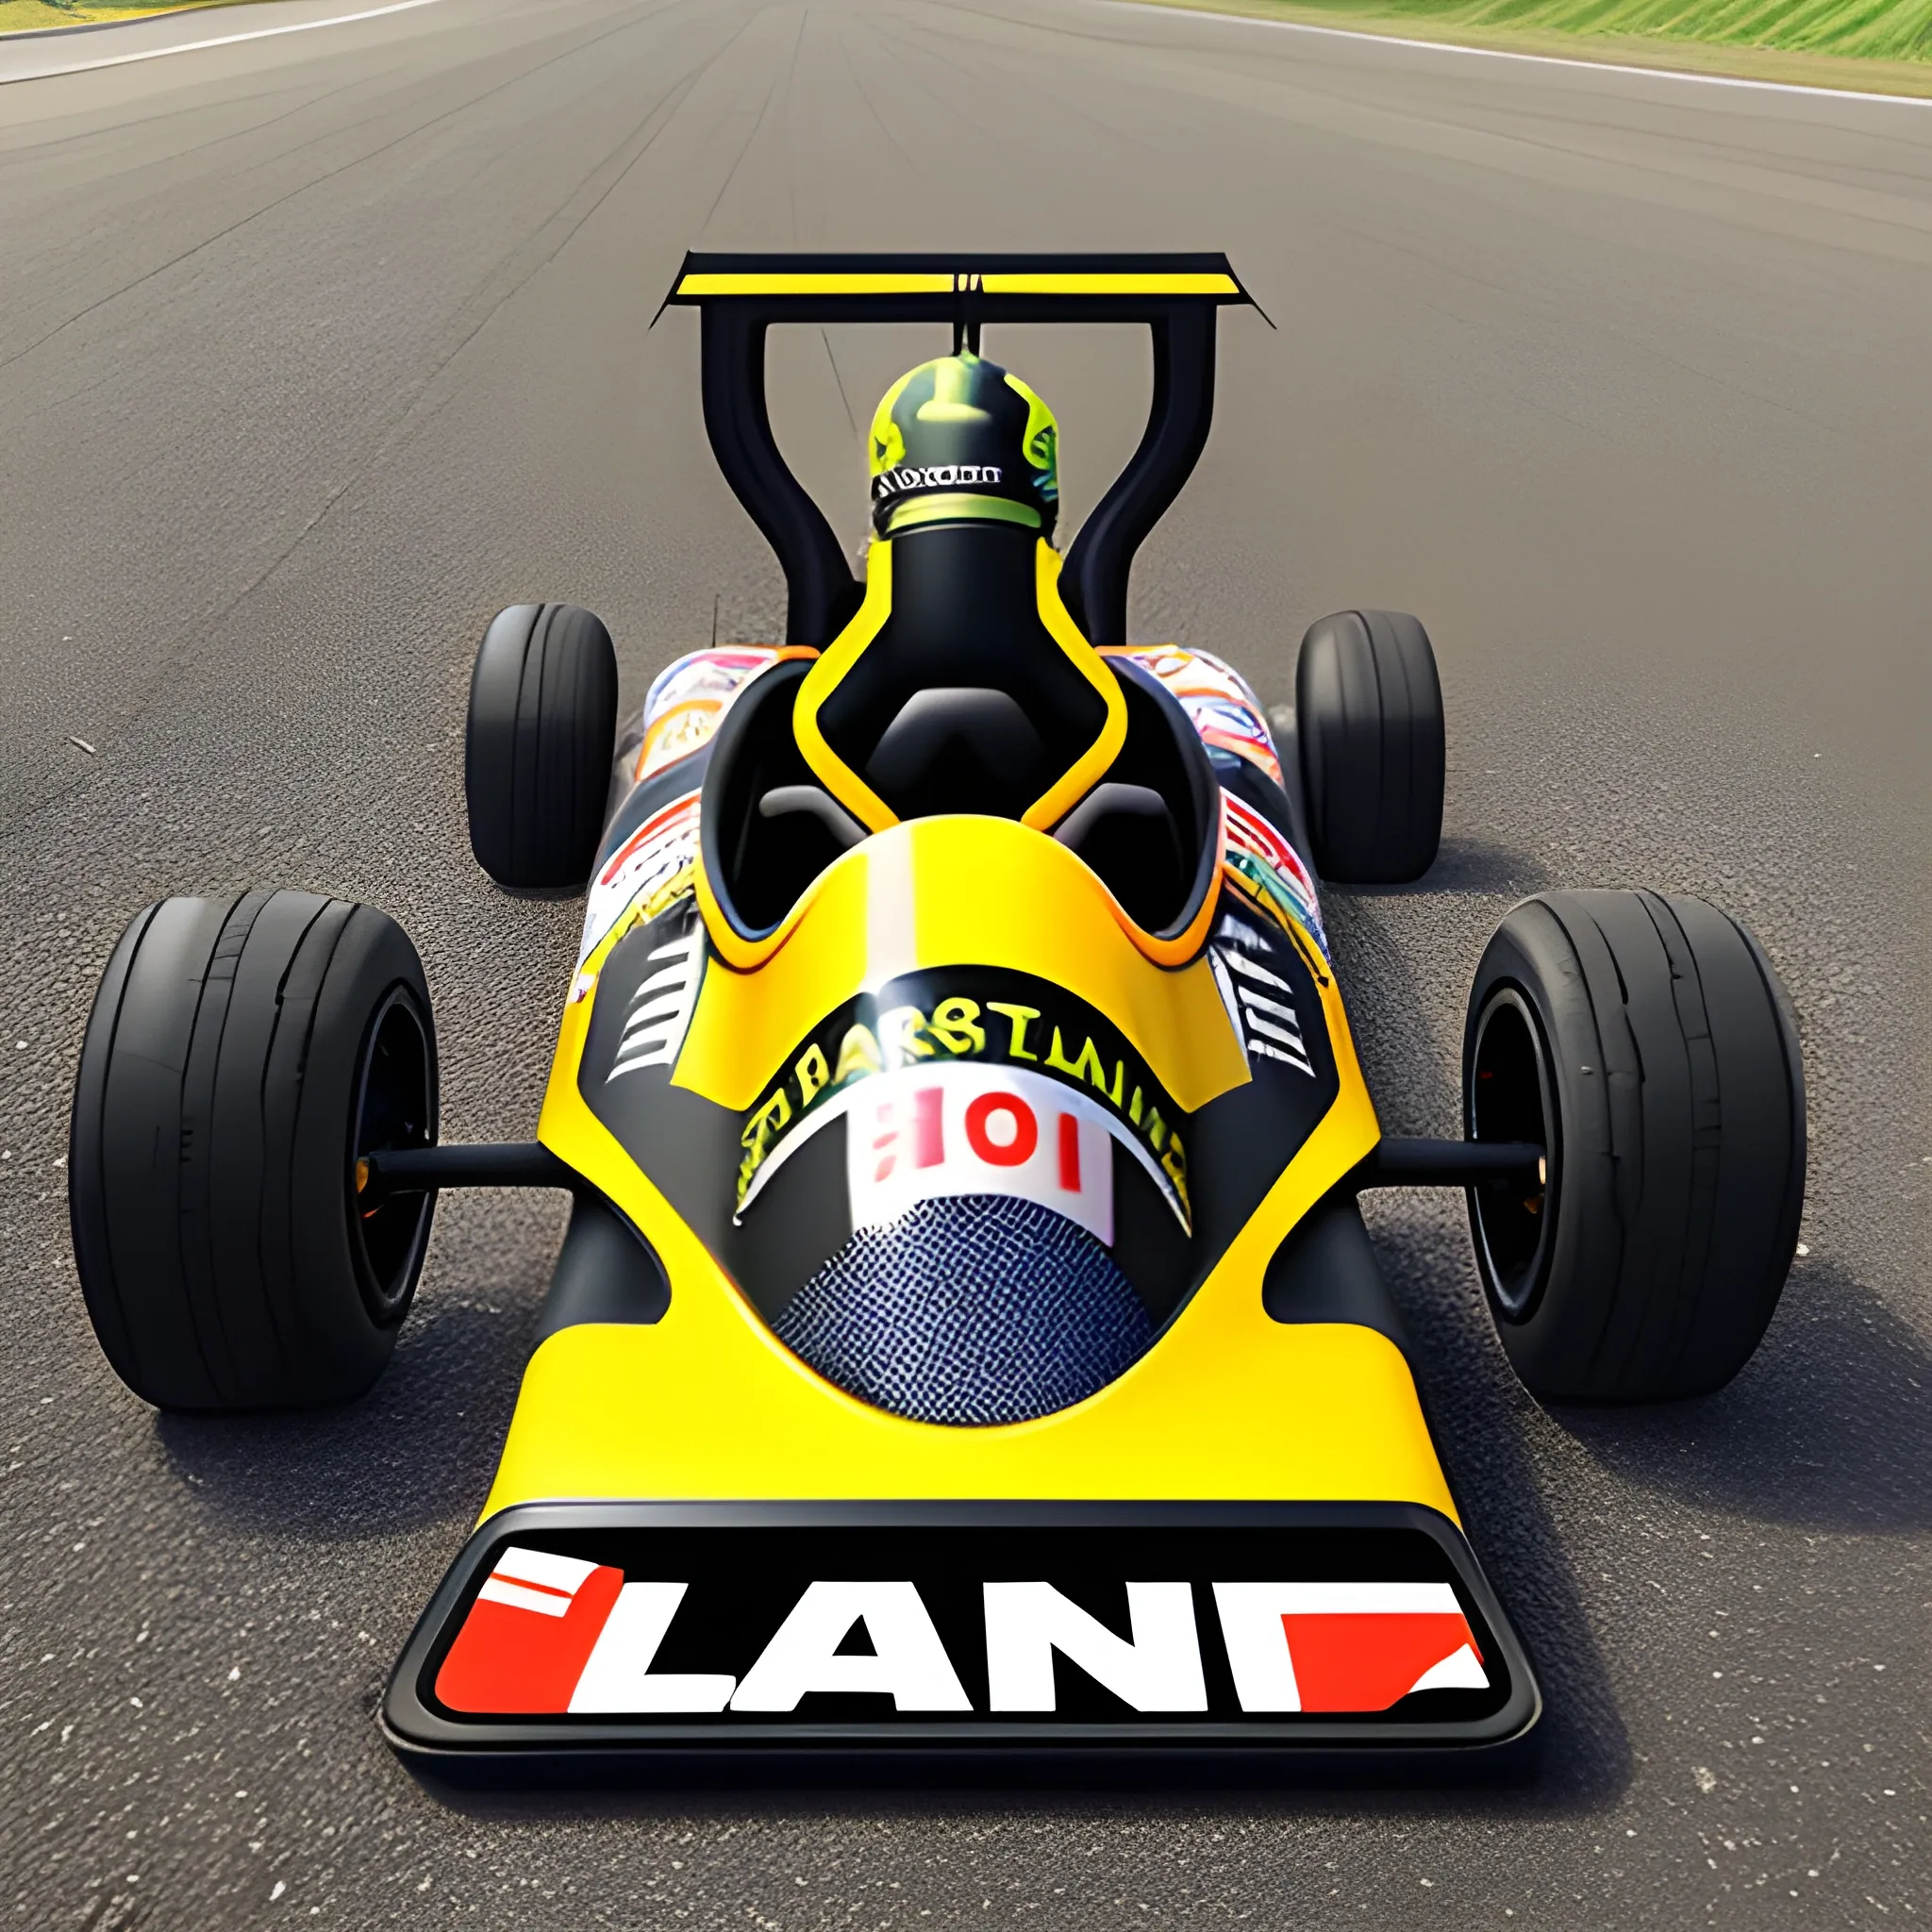 for a karting team, with a kart leaving a trail of fire on the list and the name "Karting Last Lap" printed on the logo